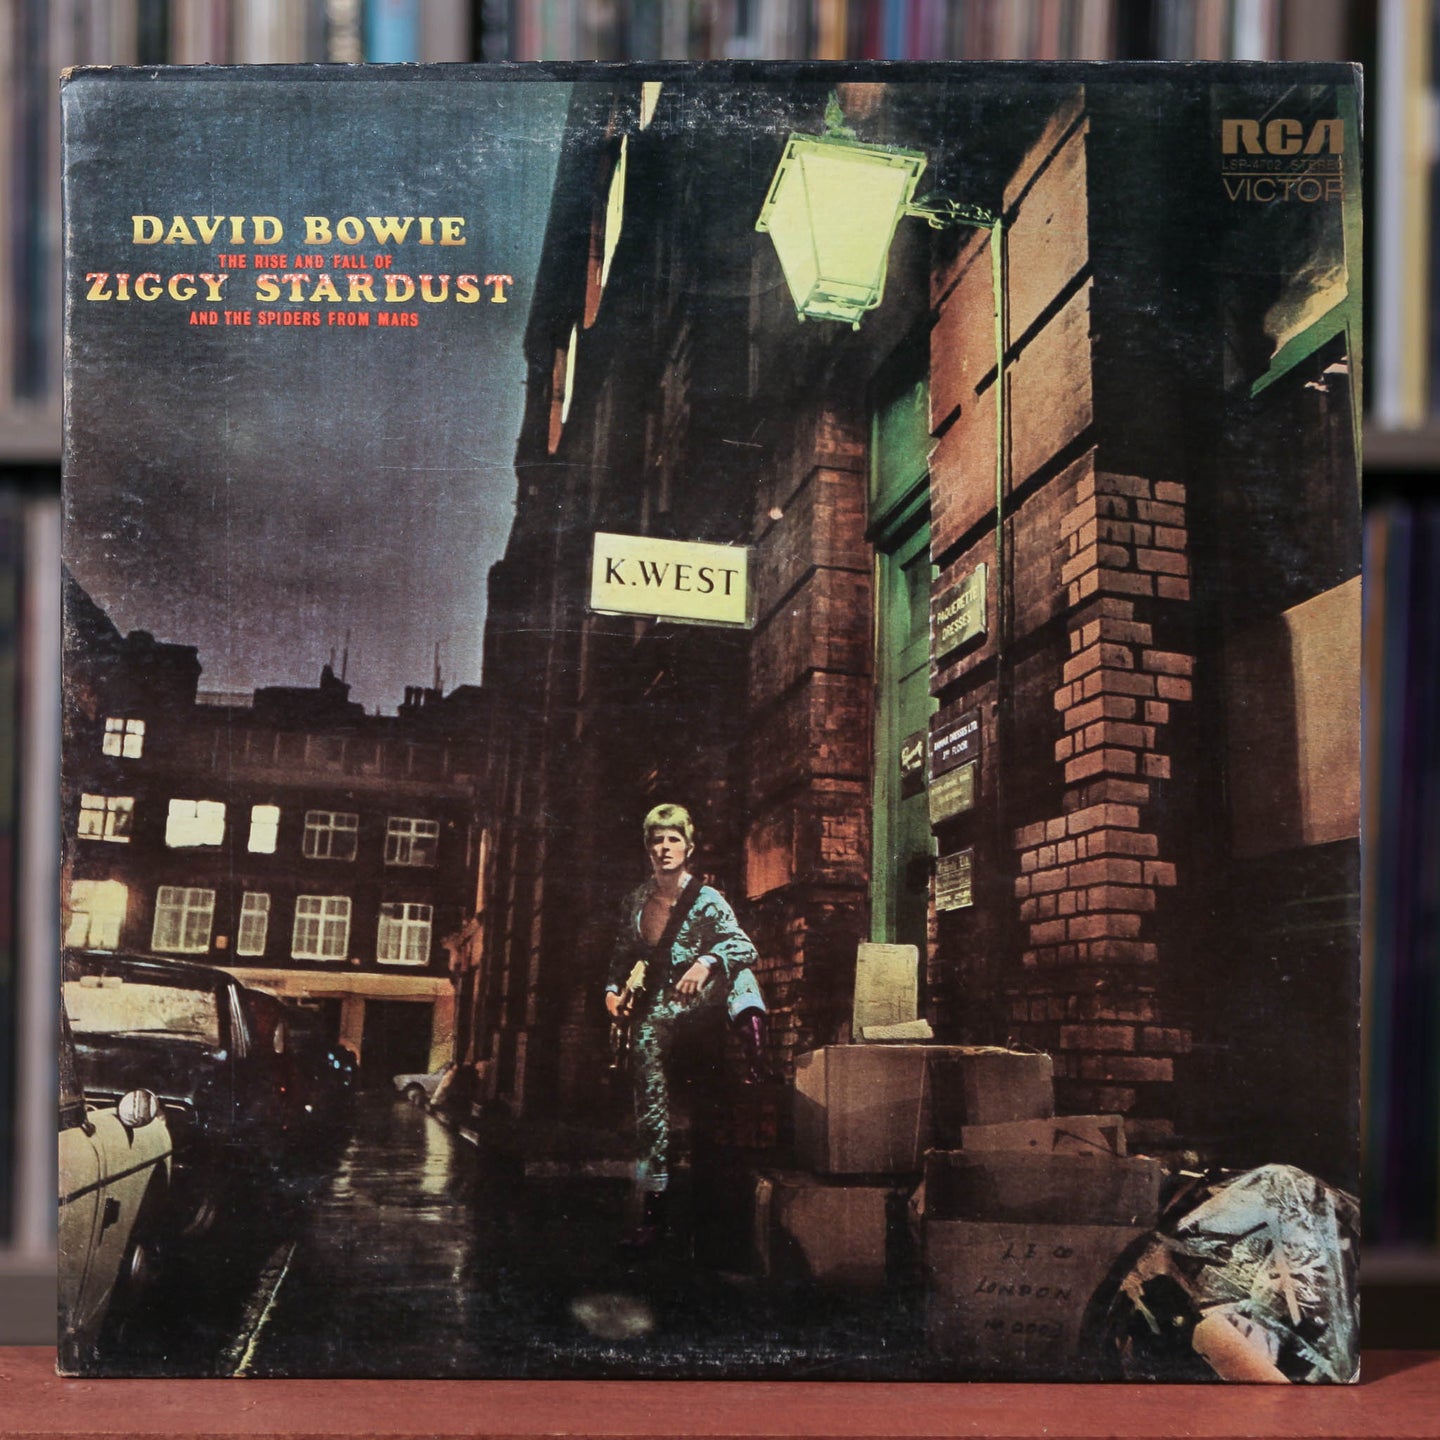 David Bowie - The Rise And Fall Of Ziggy Stardust And The Spiders From Mars - 1972 RCA, VG+/VG+